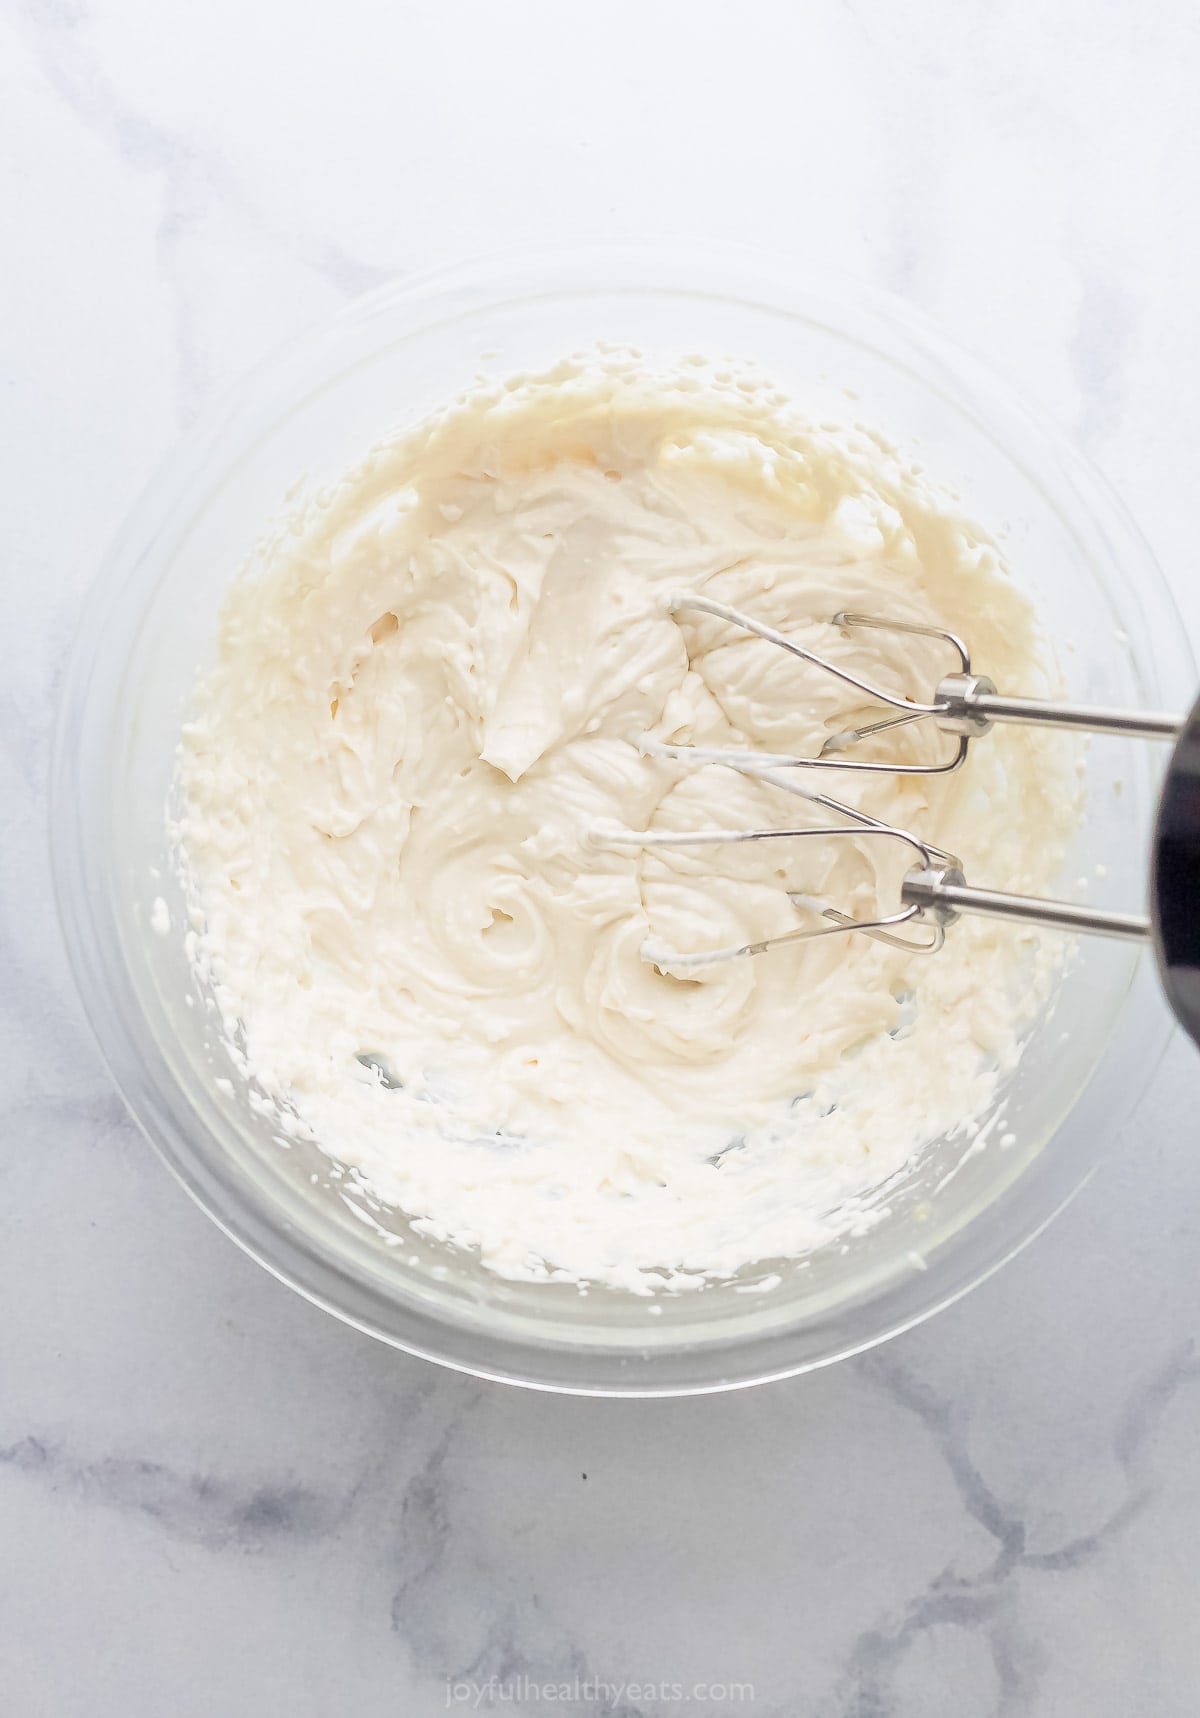 Beating the cream cheese frosting. 